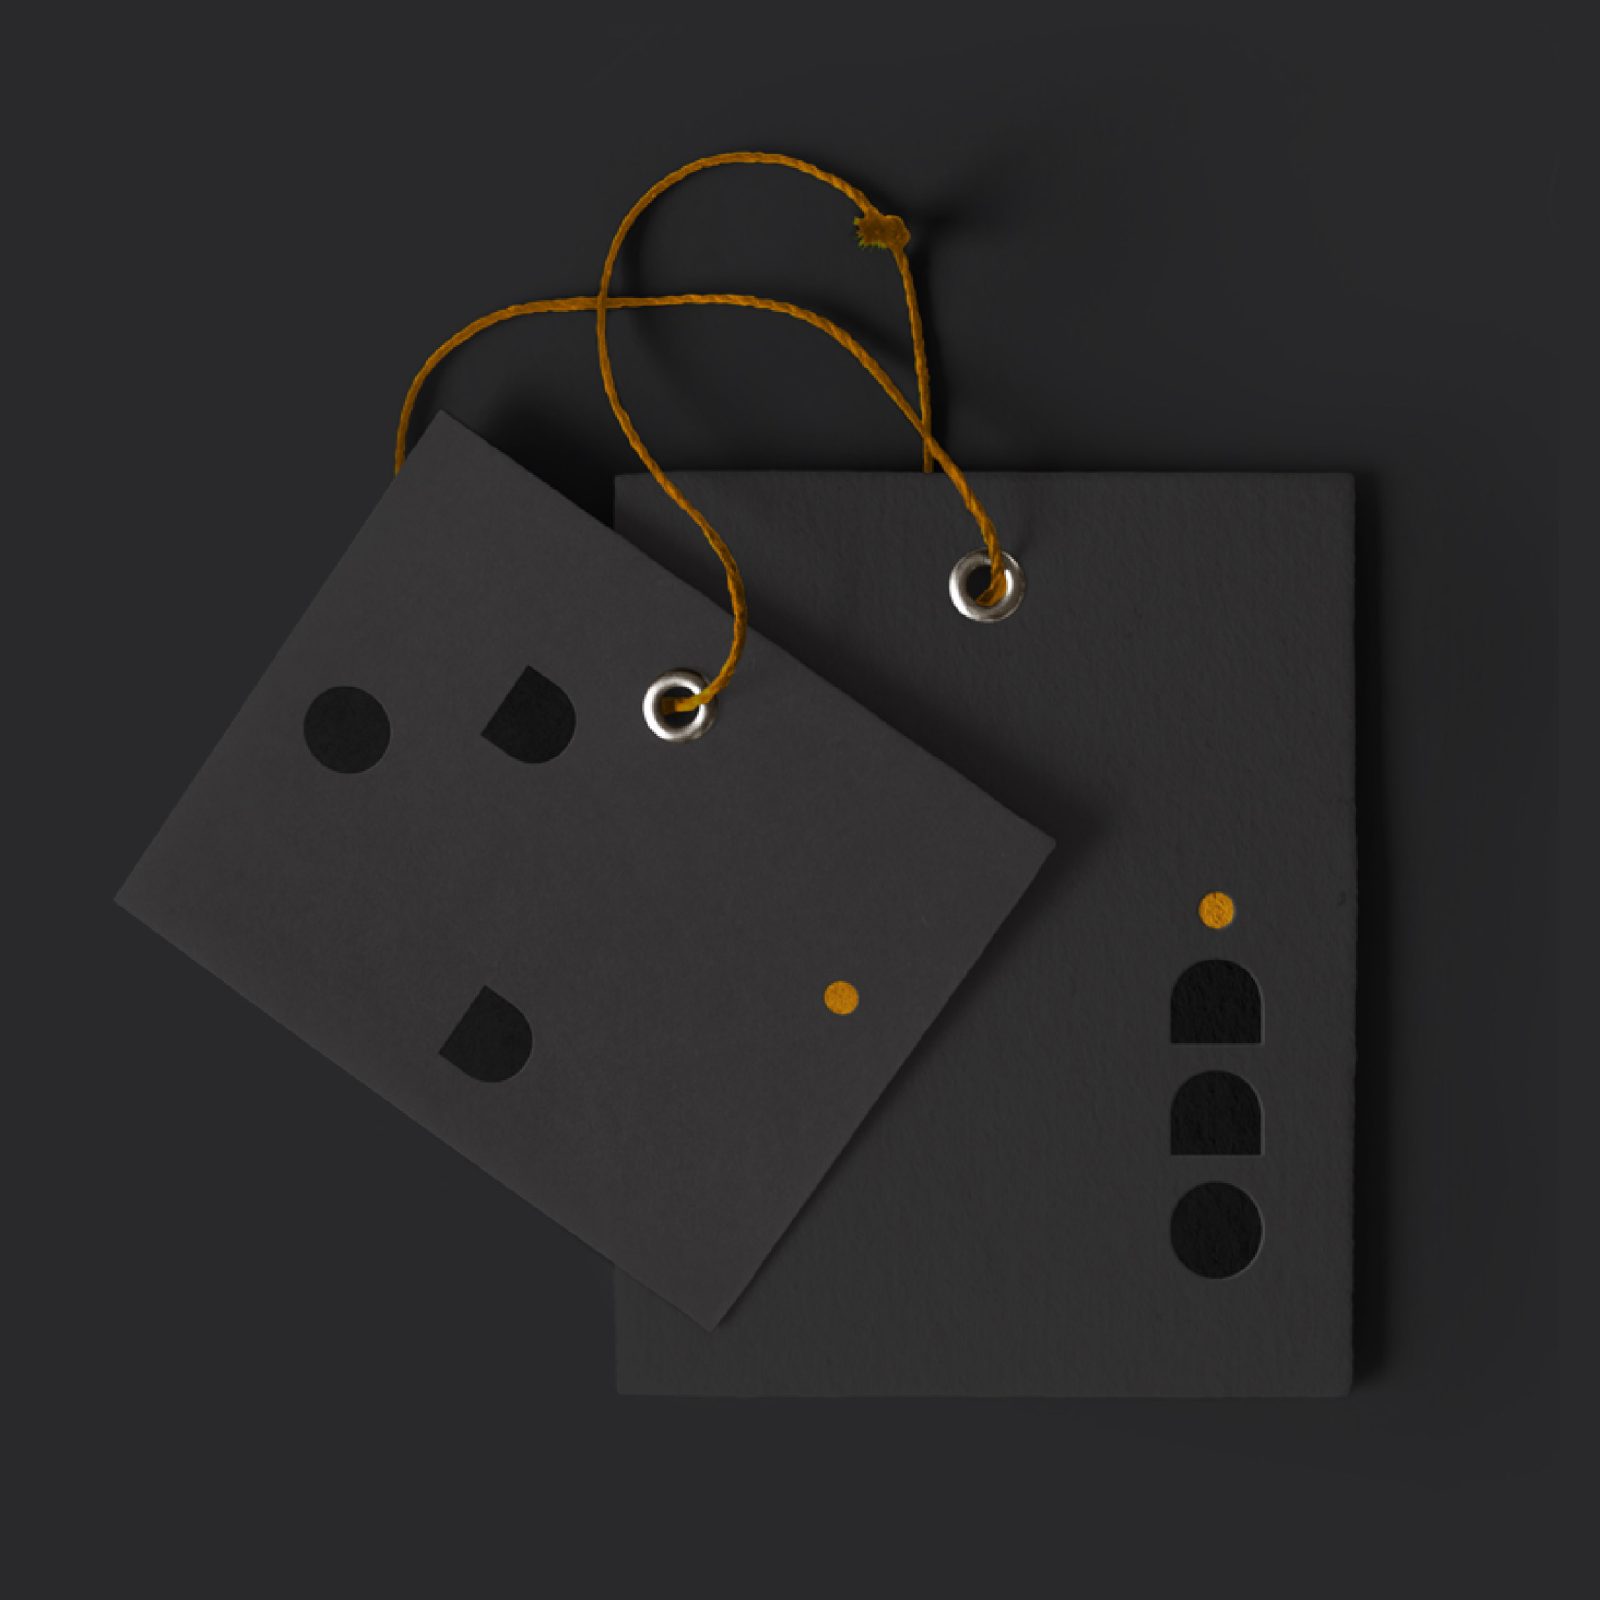 Two black tags with a brand design featuring geometric shapes, connected by a yellow string, displayed against a dark background.